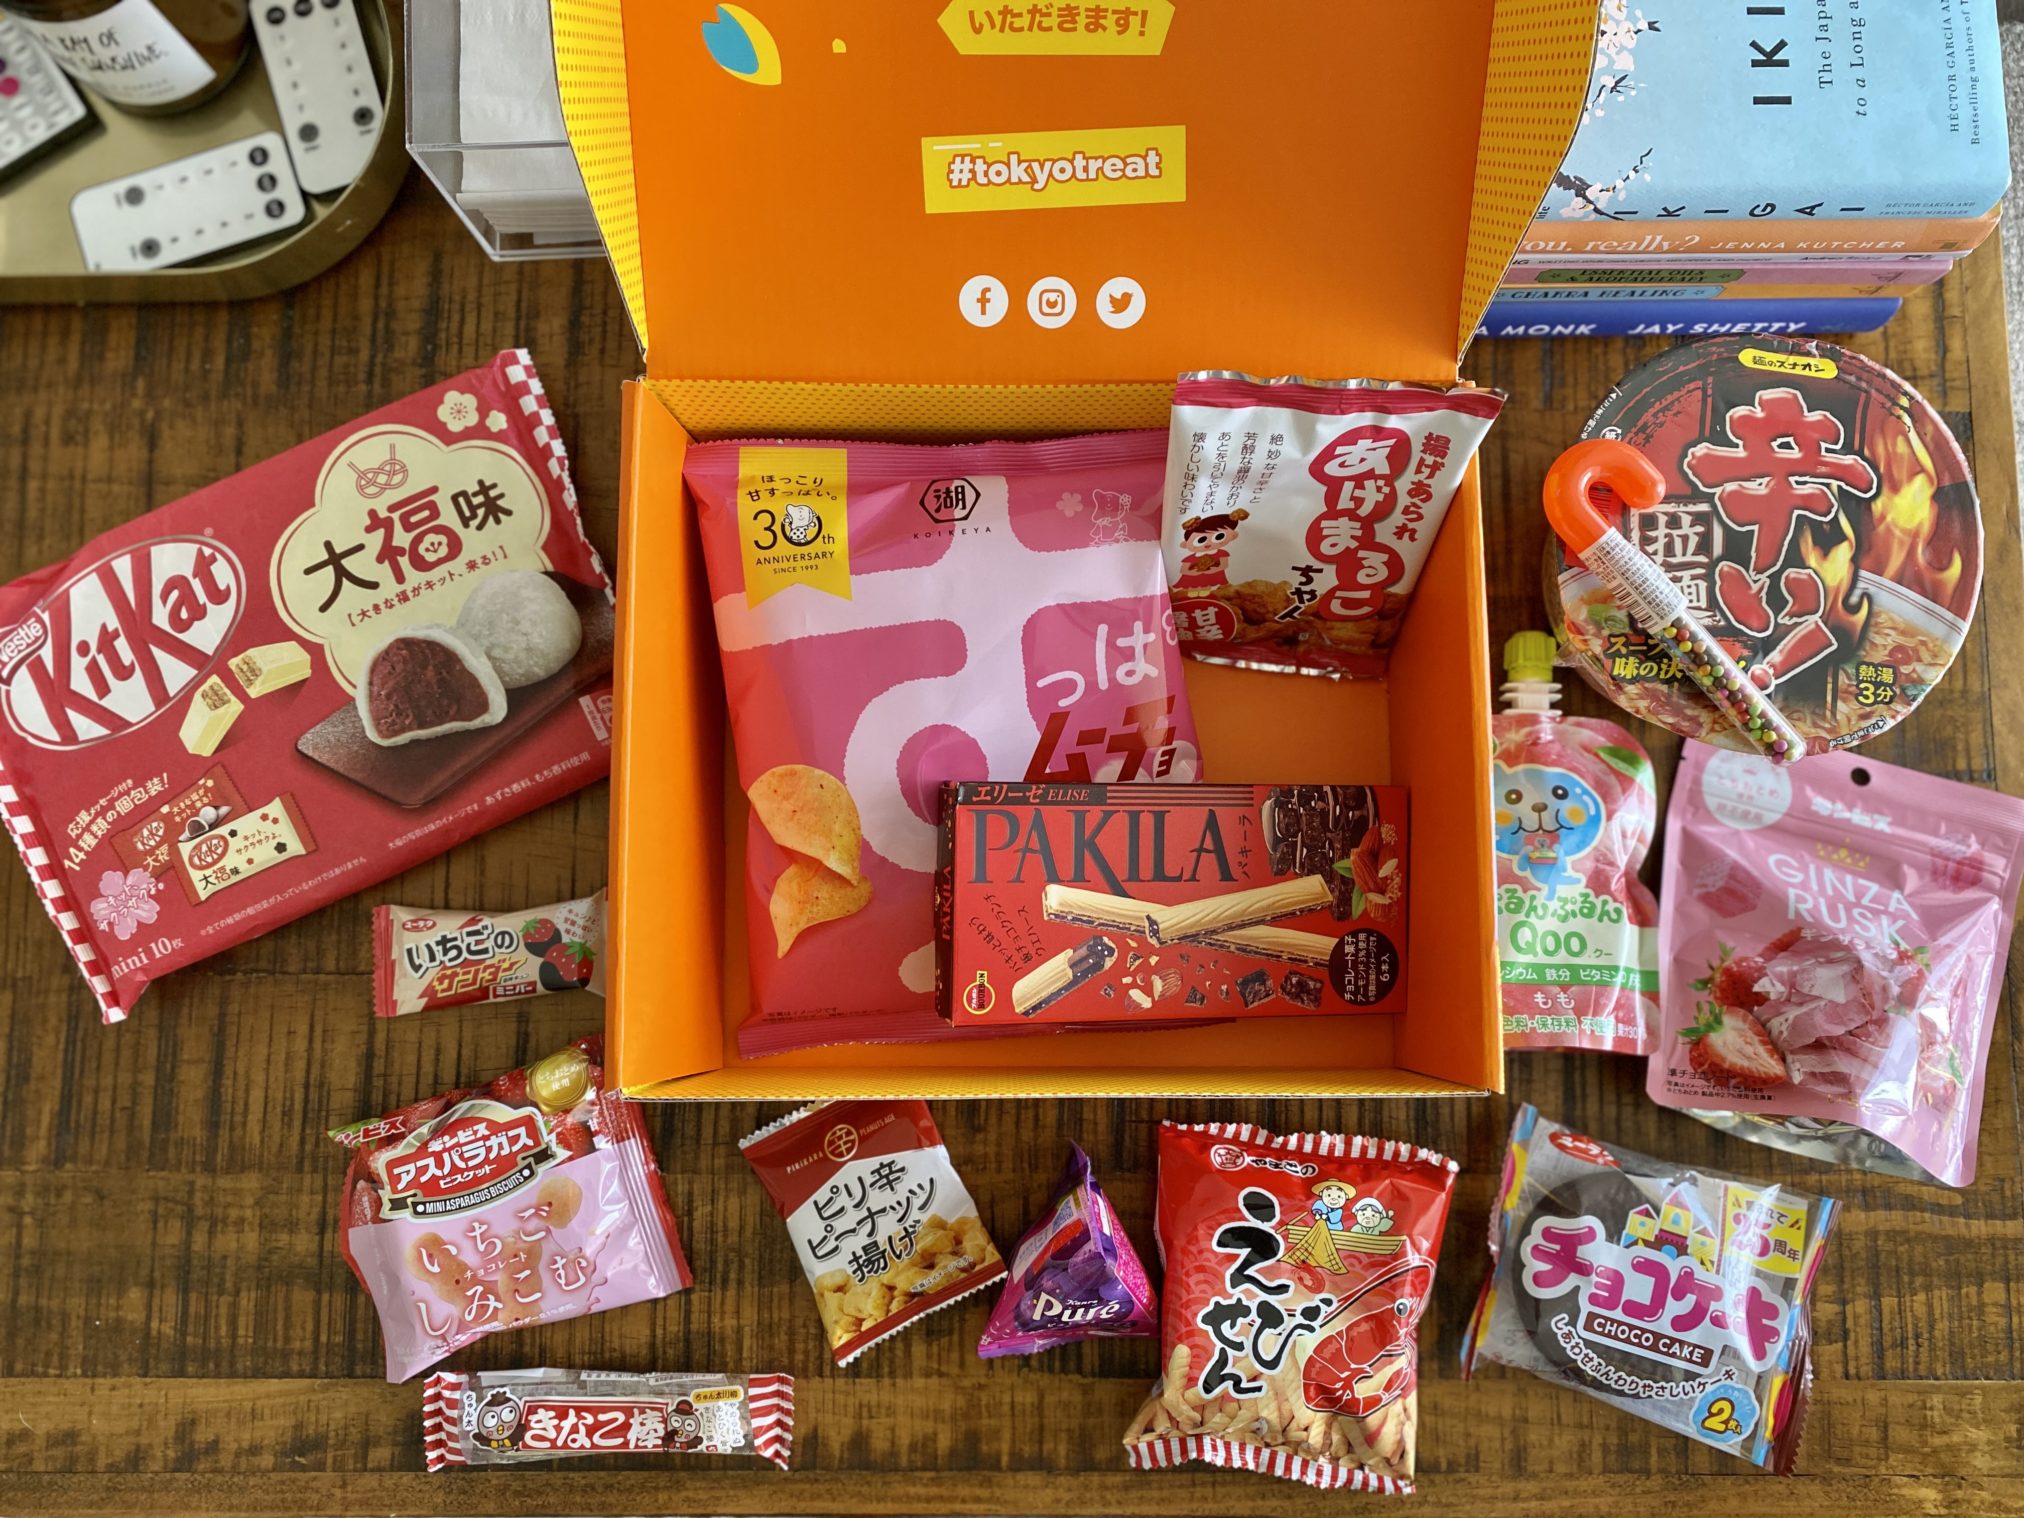 Tokyo Treat Box Review - Best Japanese Snack Box?